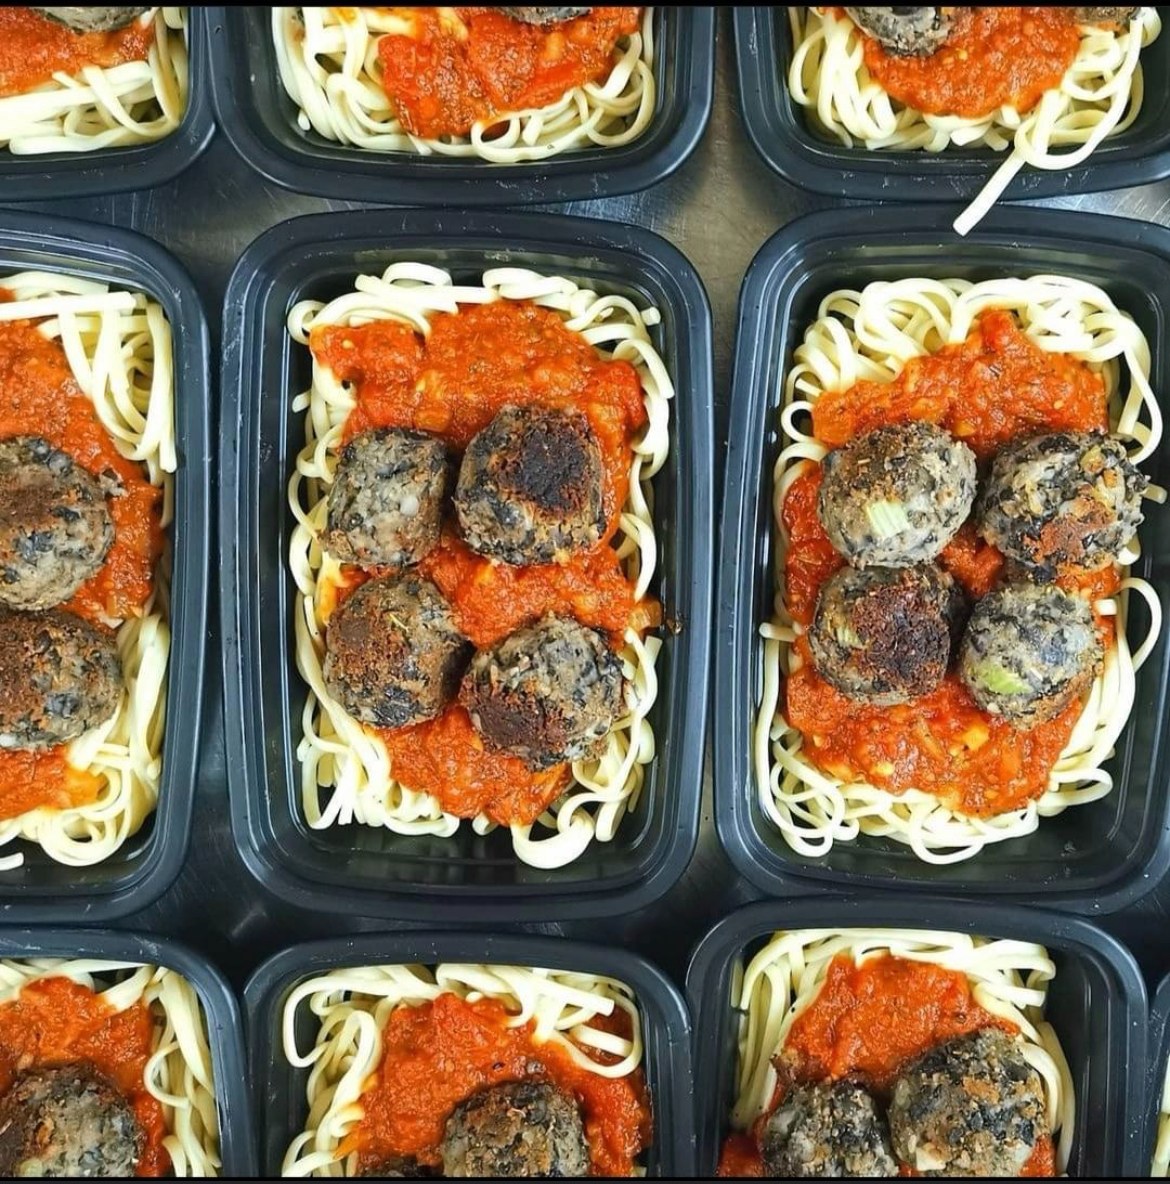 A group of containers of Fierce Fuel black bean meatballs and organic spaghetti.